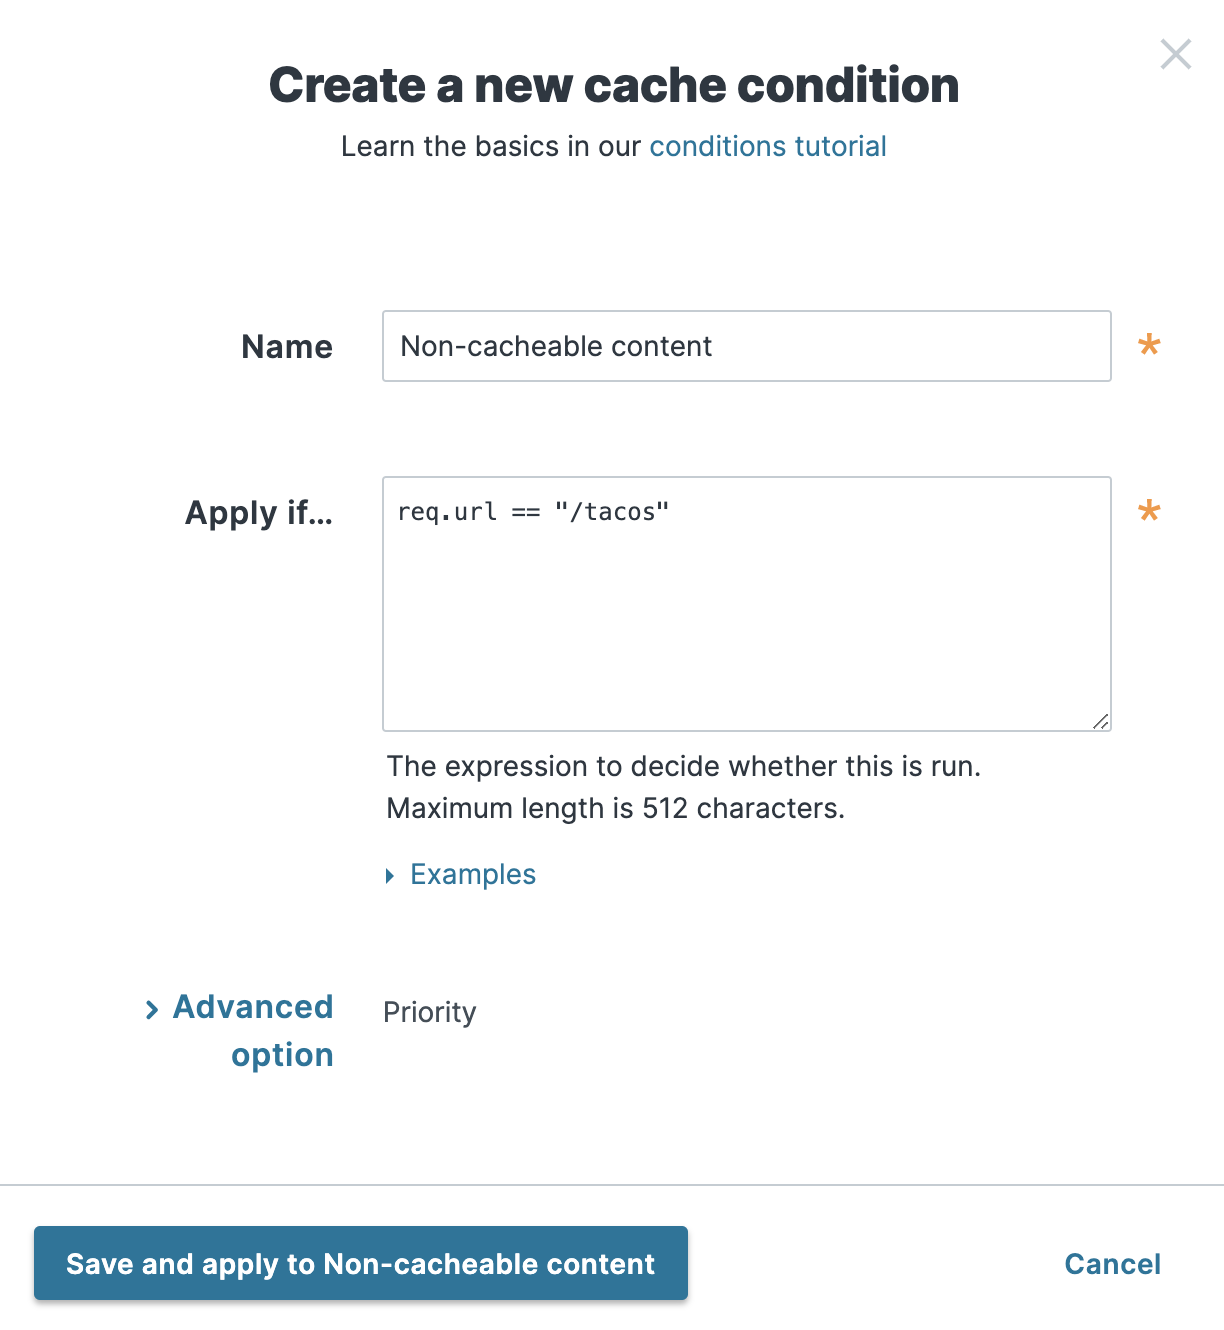 Creating a cache condition in the Fastly web interface